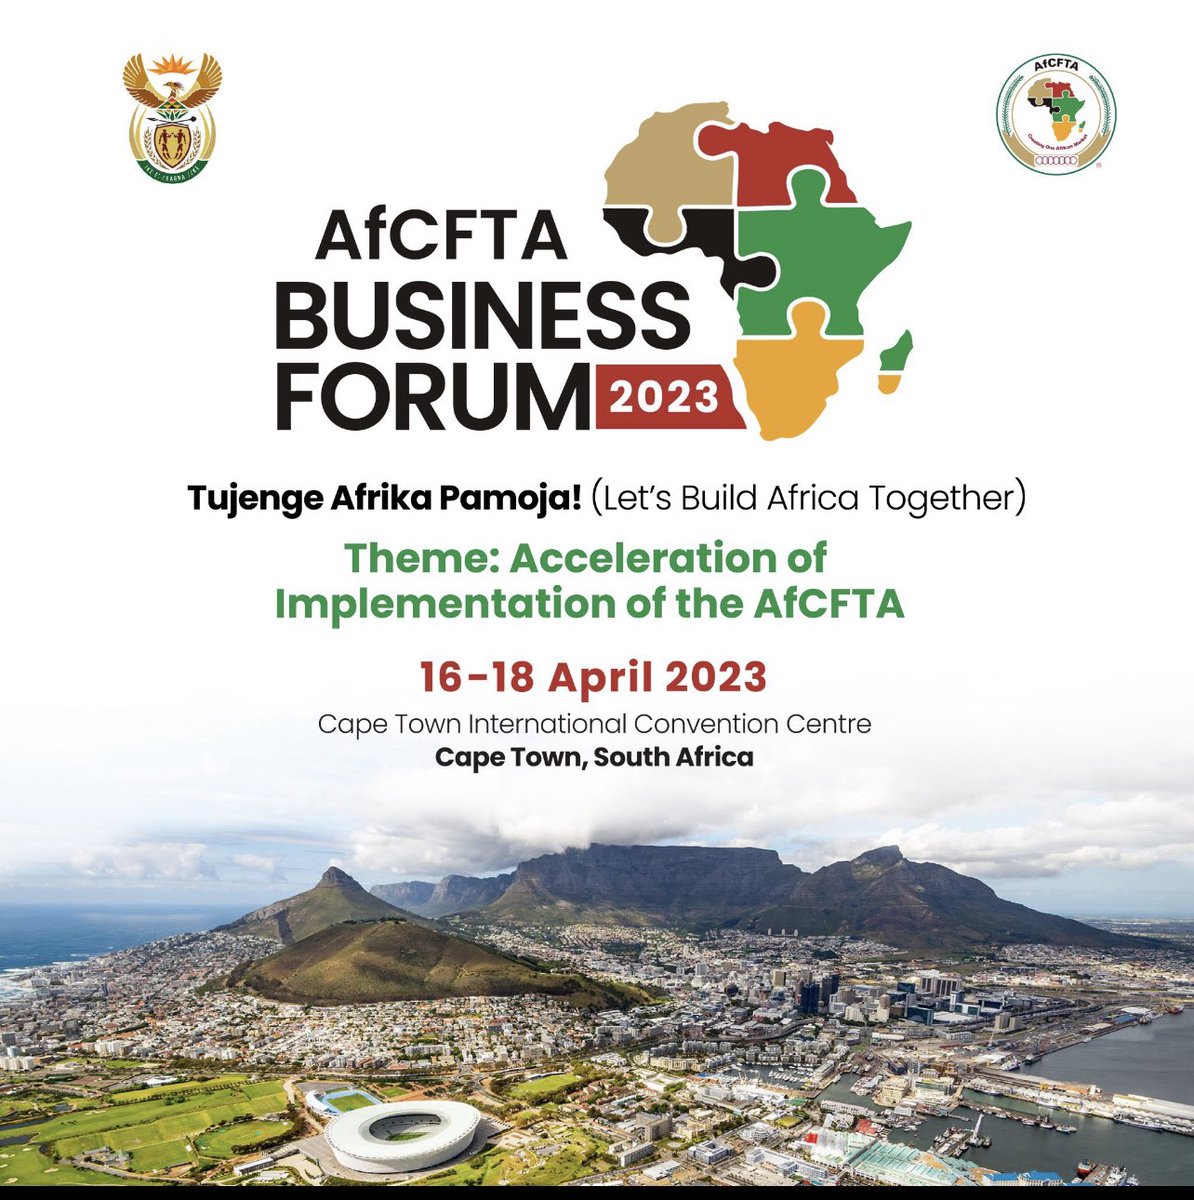 The #AfCFTA Business Forum is happening this weekend from 16 to 18 April 2018 in Cape Town, South Africa. Do not miss out!!!
#TujengeAfrikaPamoja
#LetsBuildTogether
#AfCFTABF2023